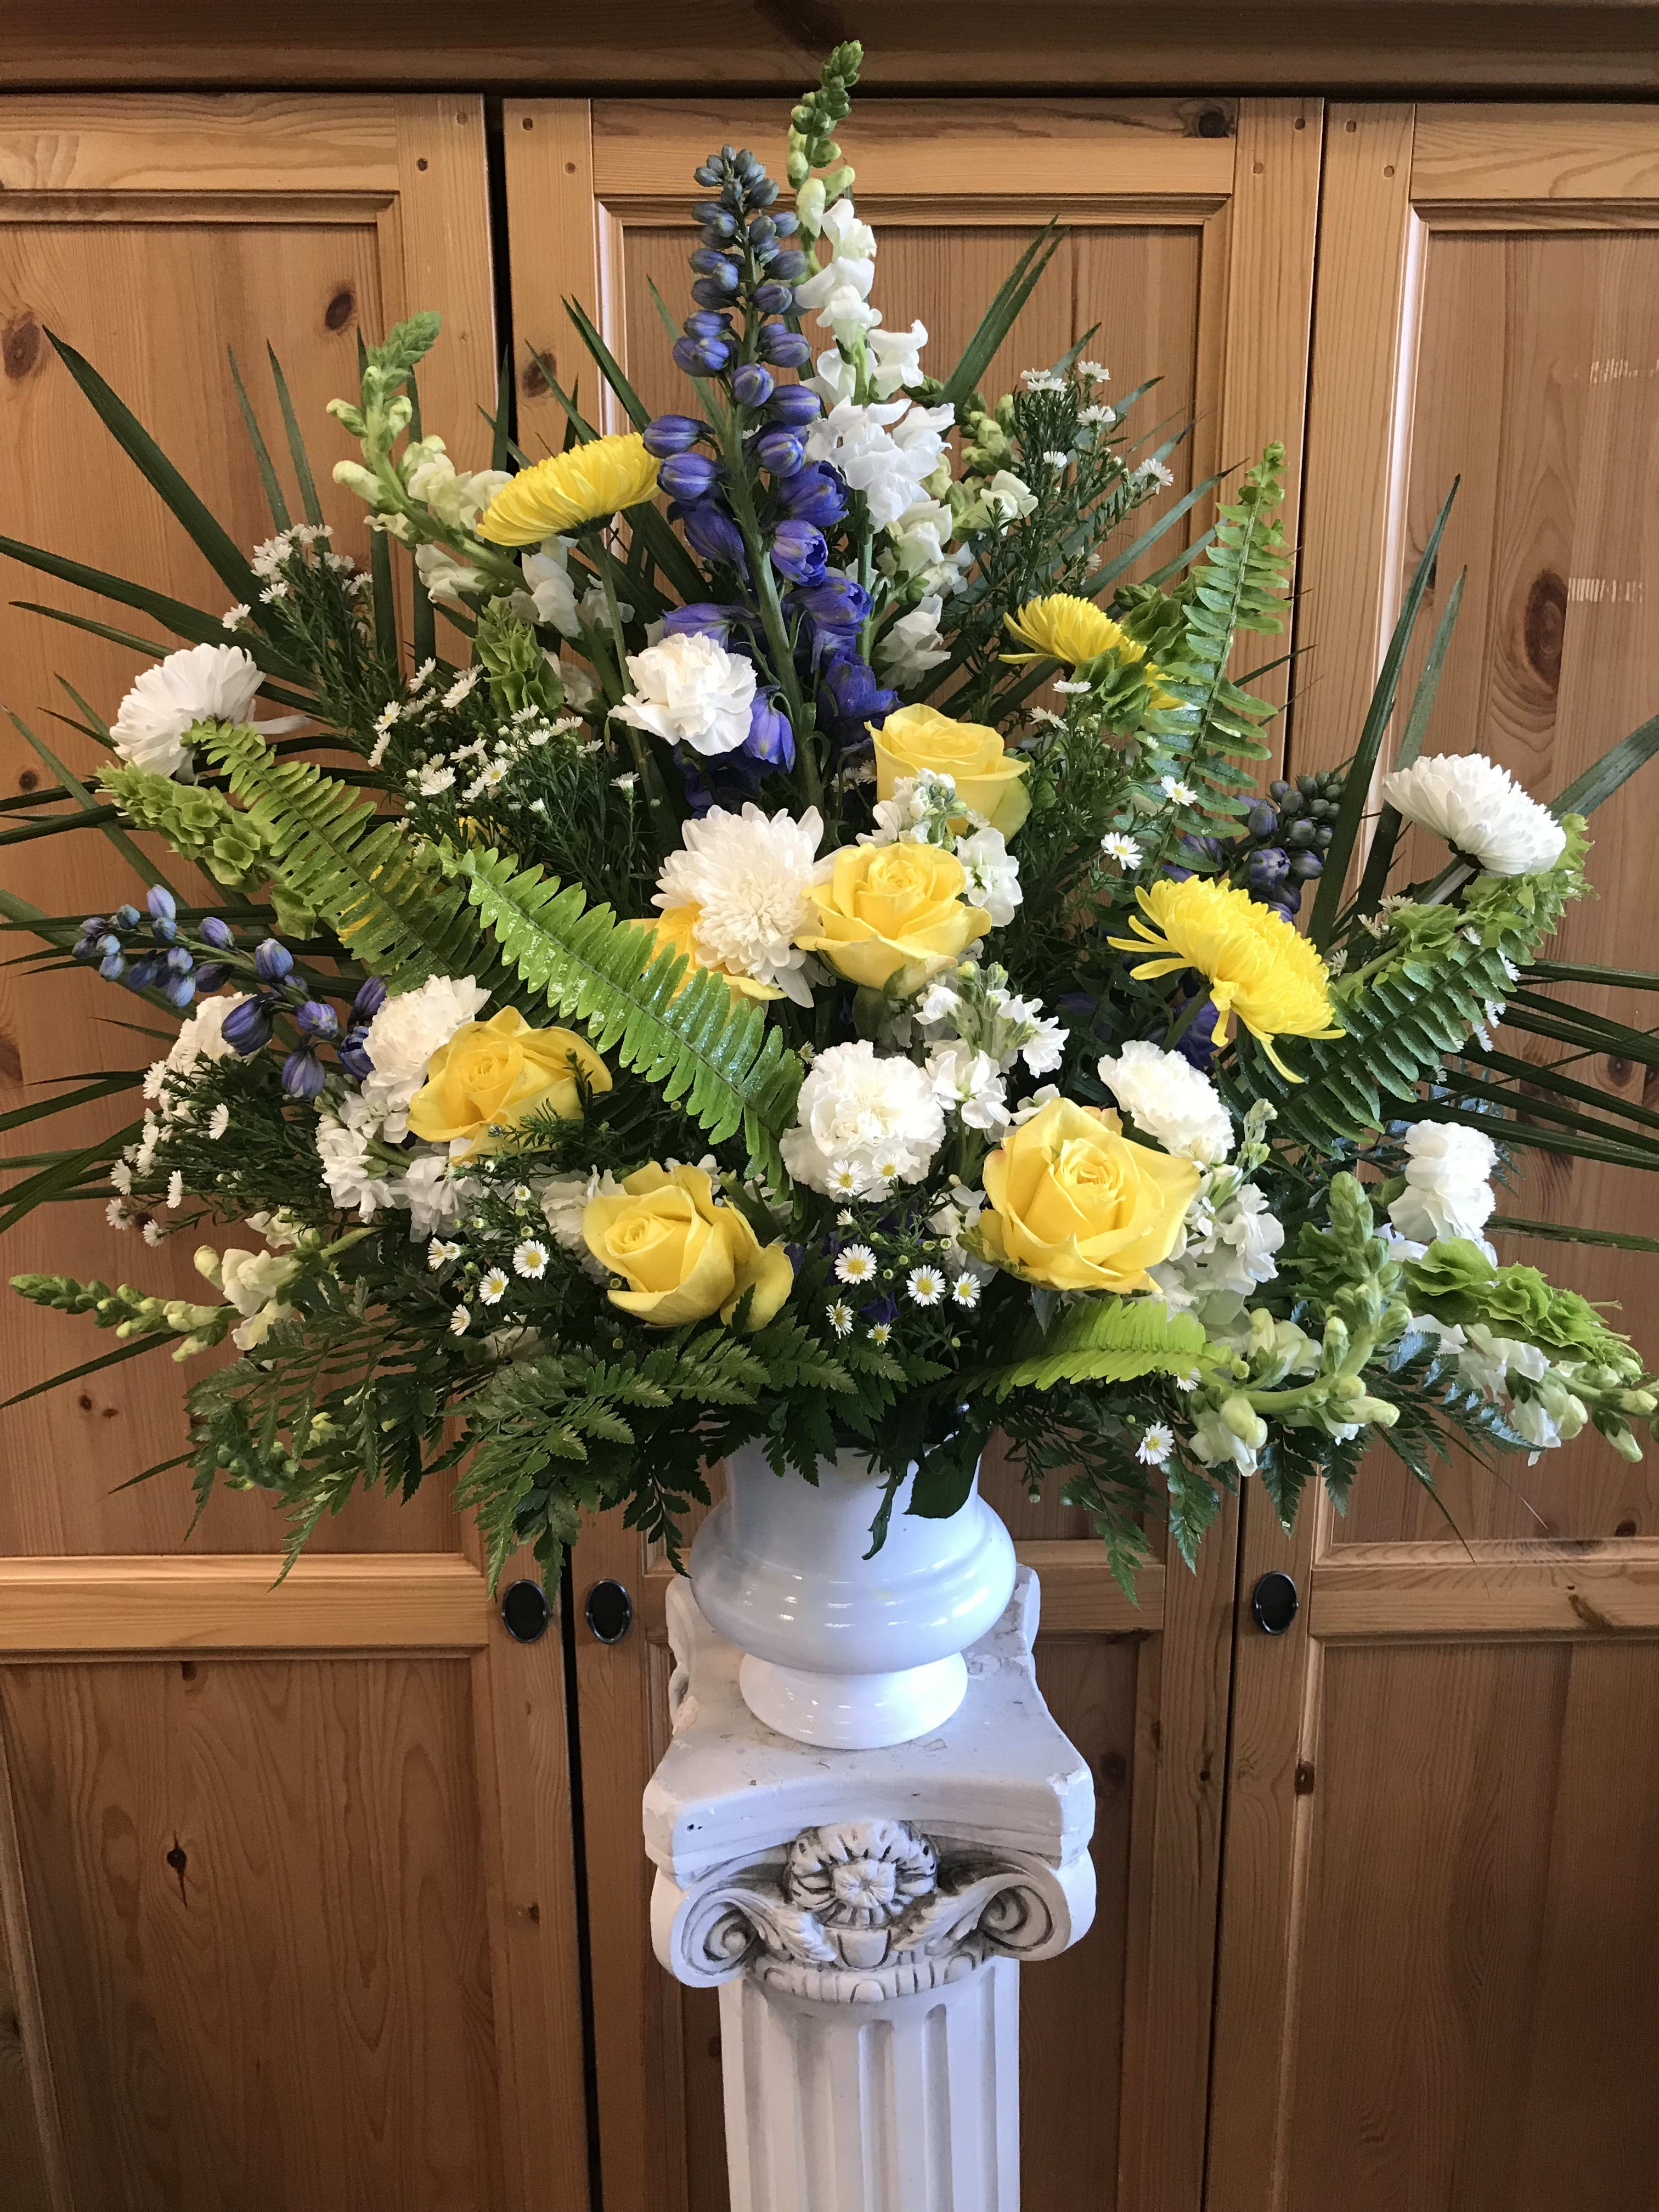 Peace and Blessings  - Peace and Blessings is a thoughtful and bright mixed arrangement in white, yellow, and blue flowers.  Other color combinations available.